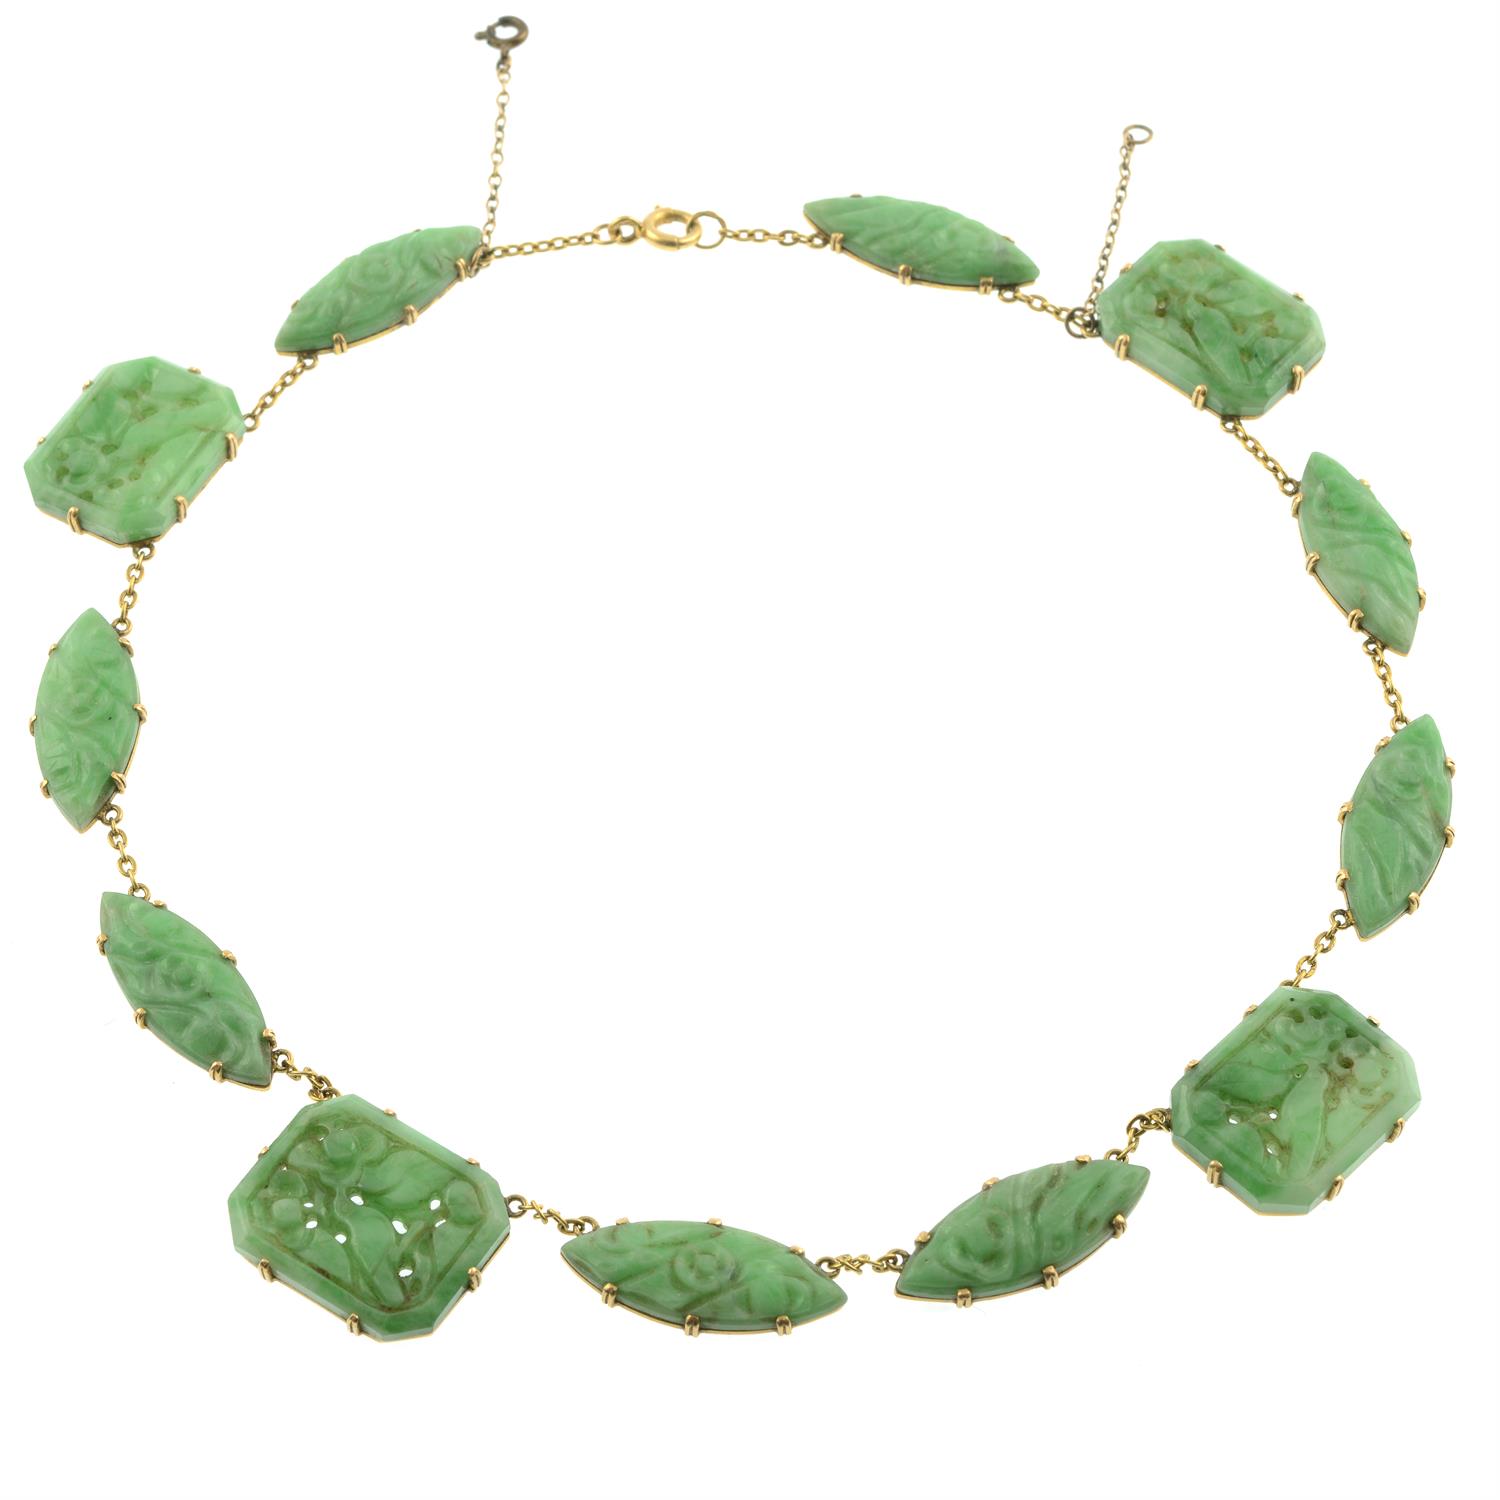 An Art Deco 18ct gold carved and pierced jadeite jade floral and bird motif necklace. - Image 2 of 3